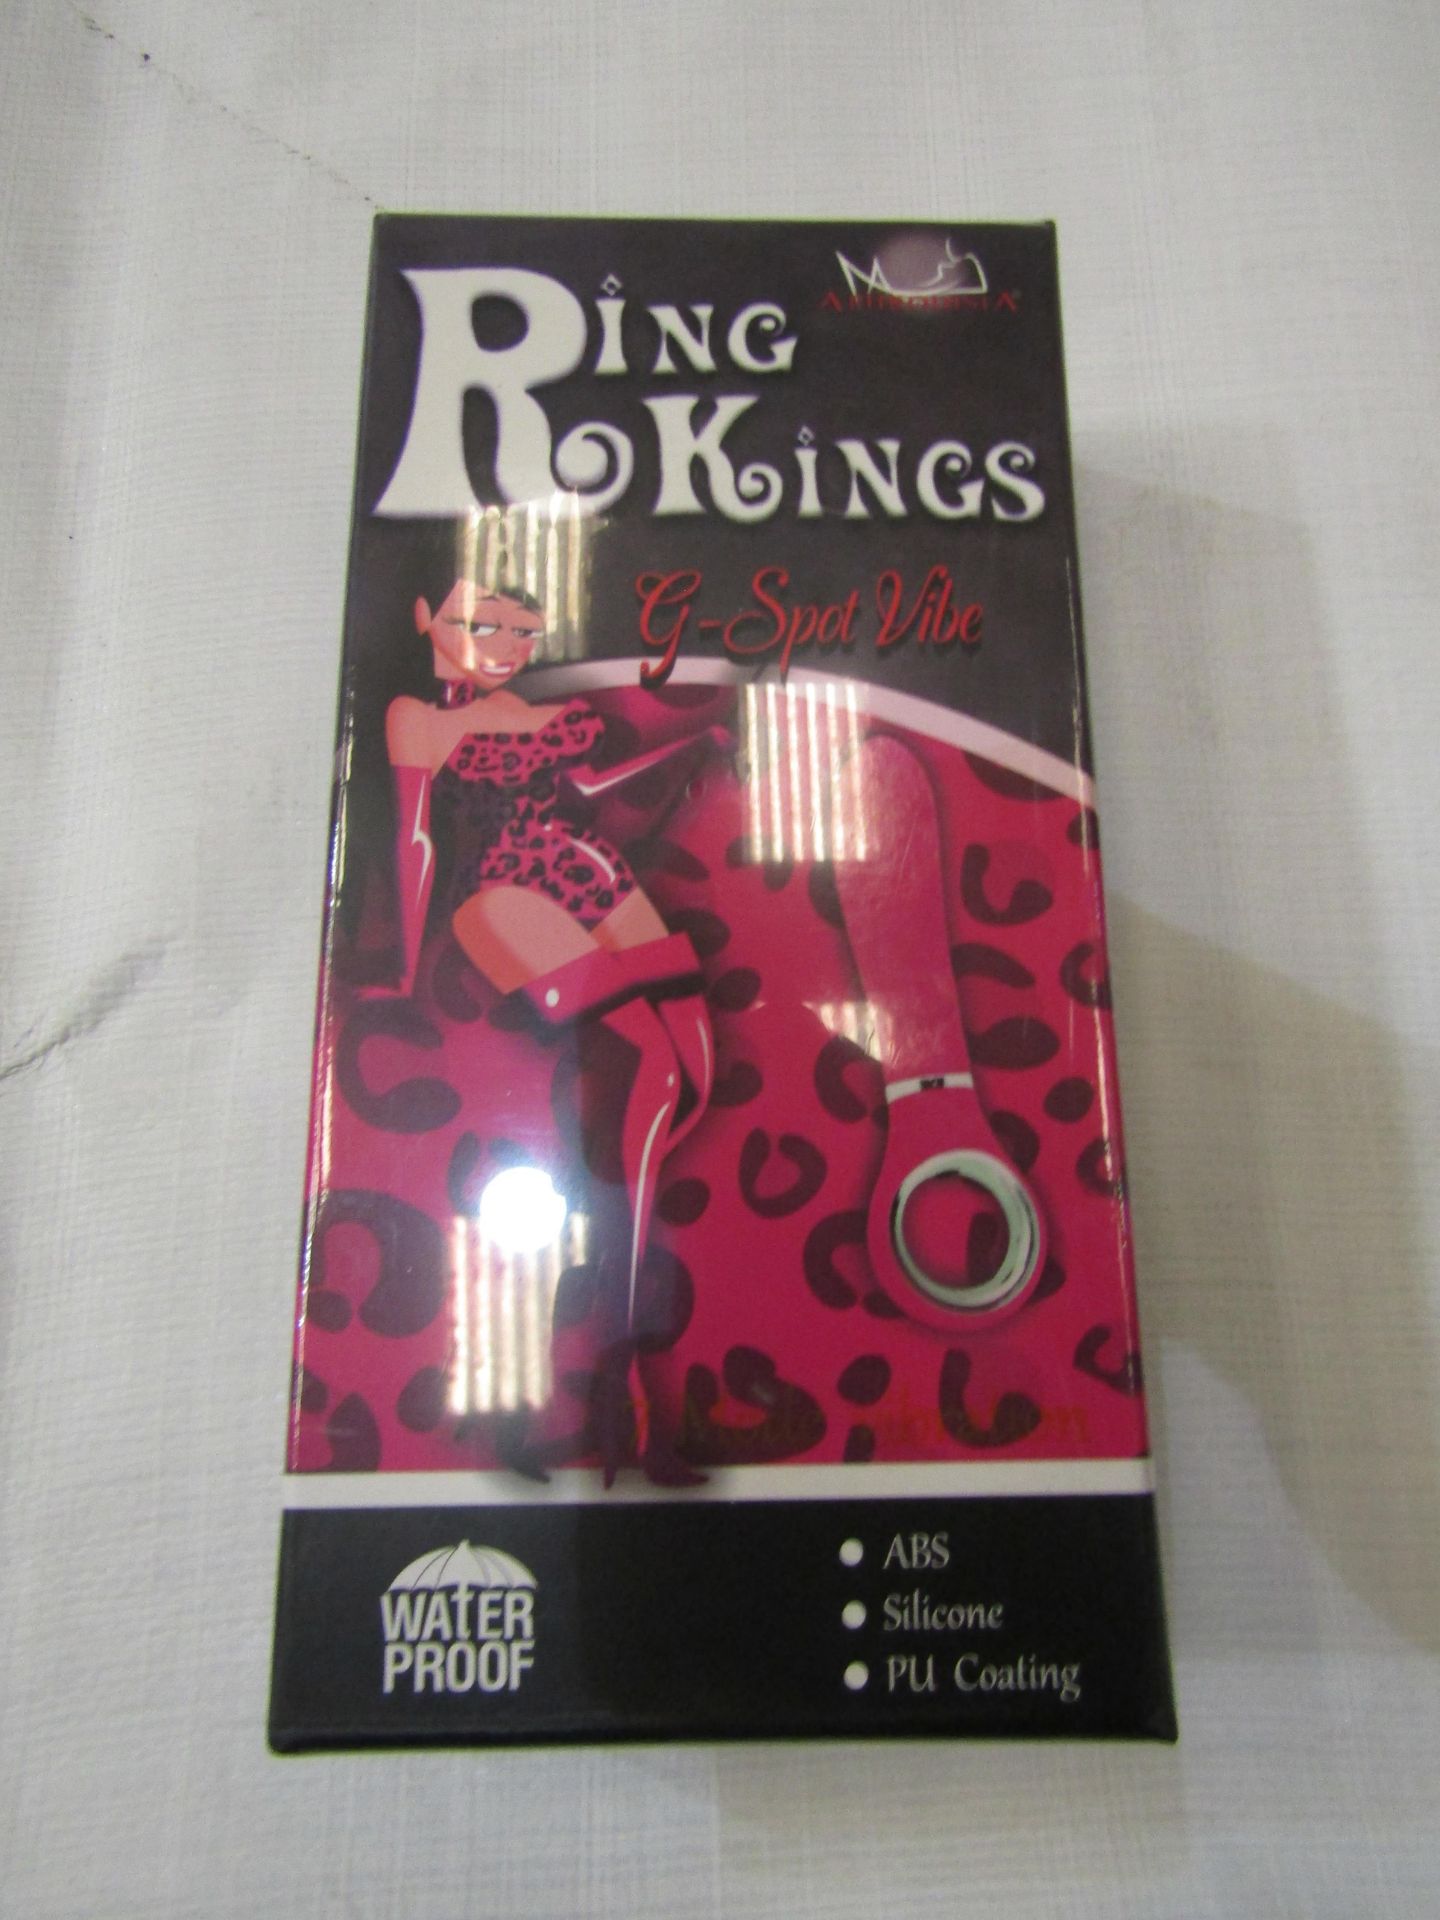 Aphrodisia Ring Kings Glans Penis Vibe With 7 Modes Of Vibration - New & Boxed.